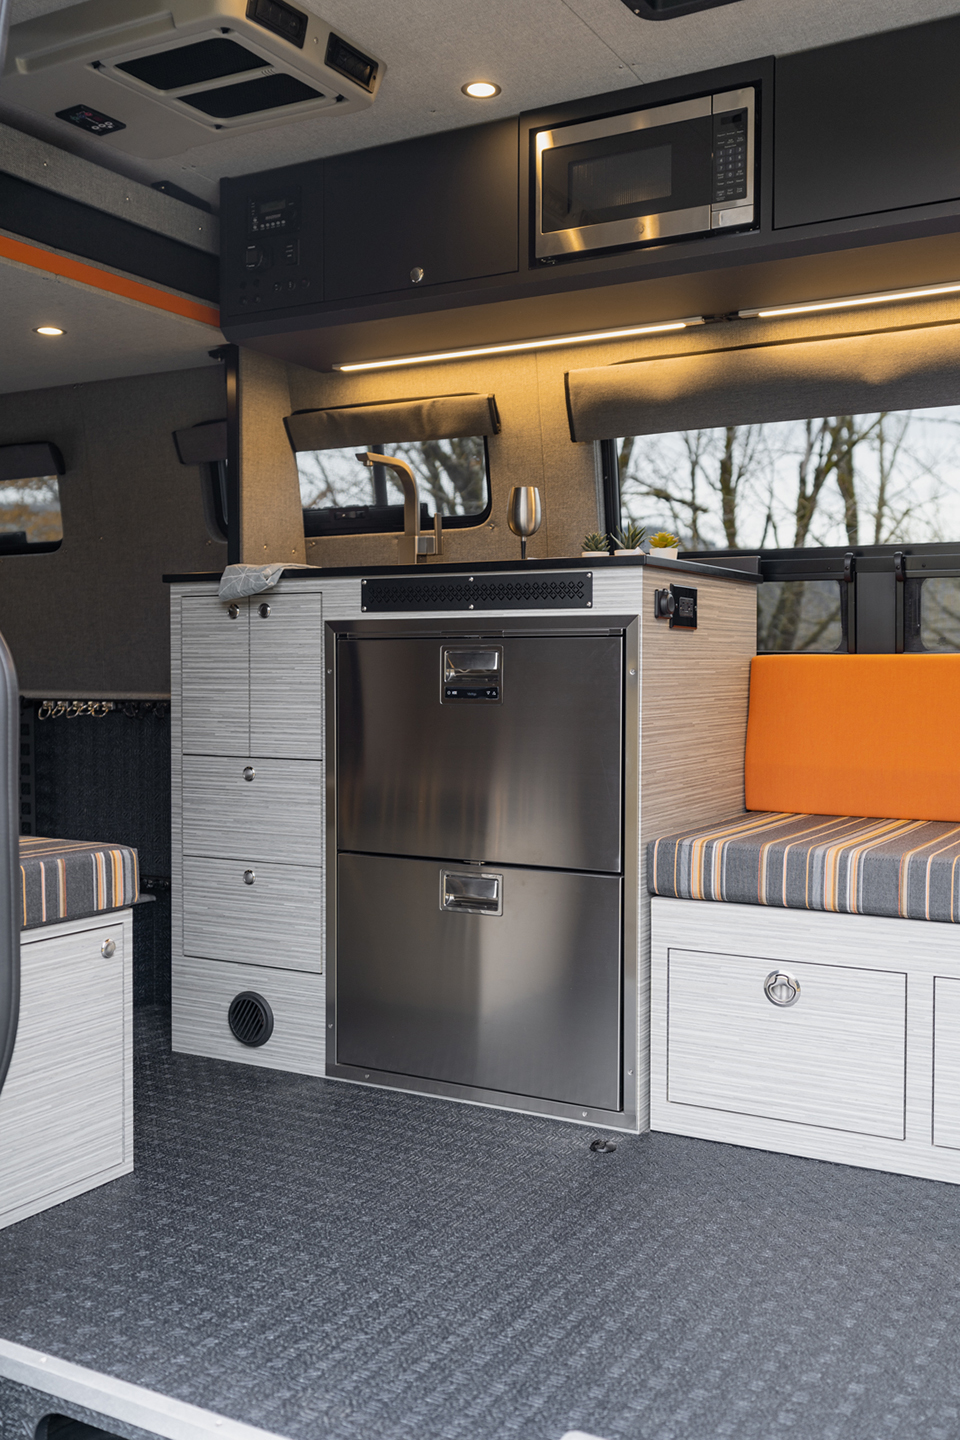 Van cabin interior with custom orange and grey striped upholstery next to vitrifrigro stainless steel refrigerator